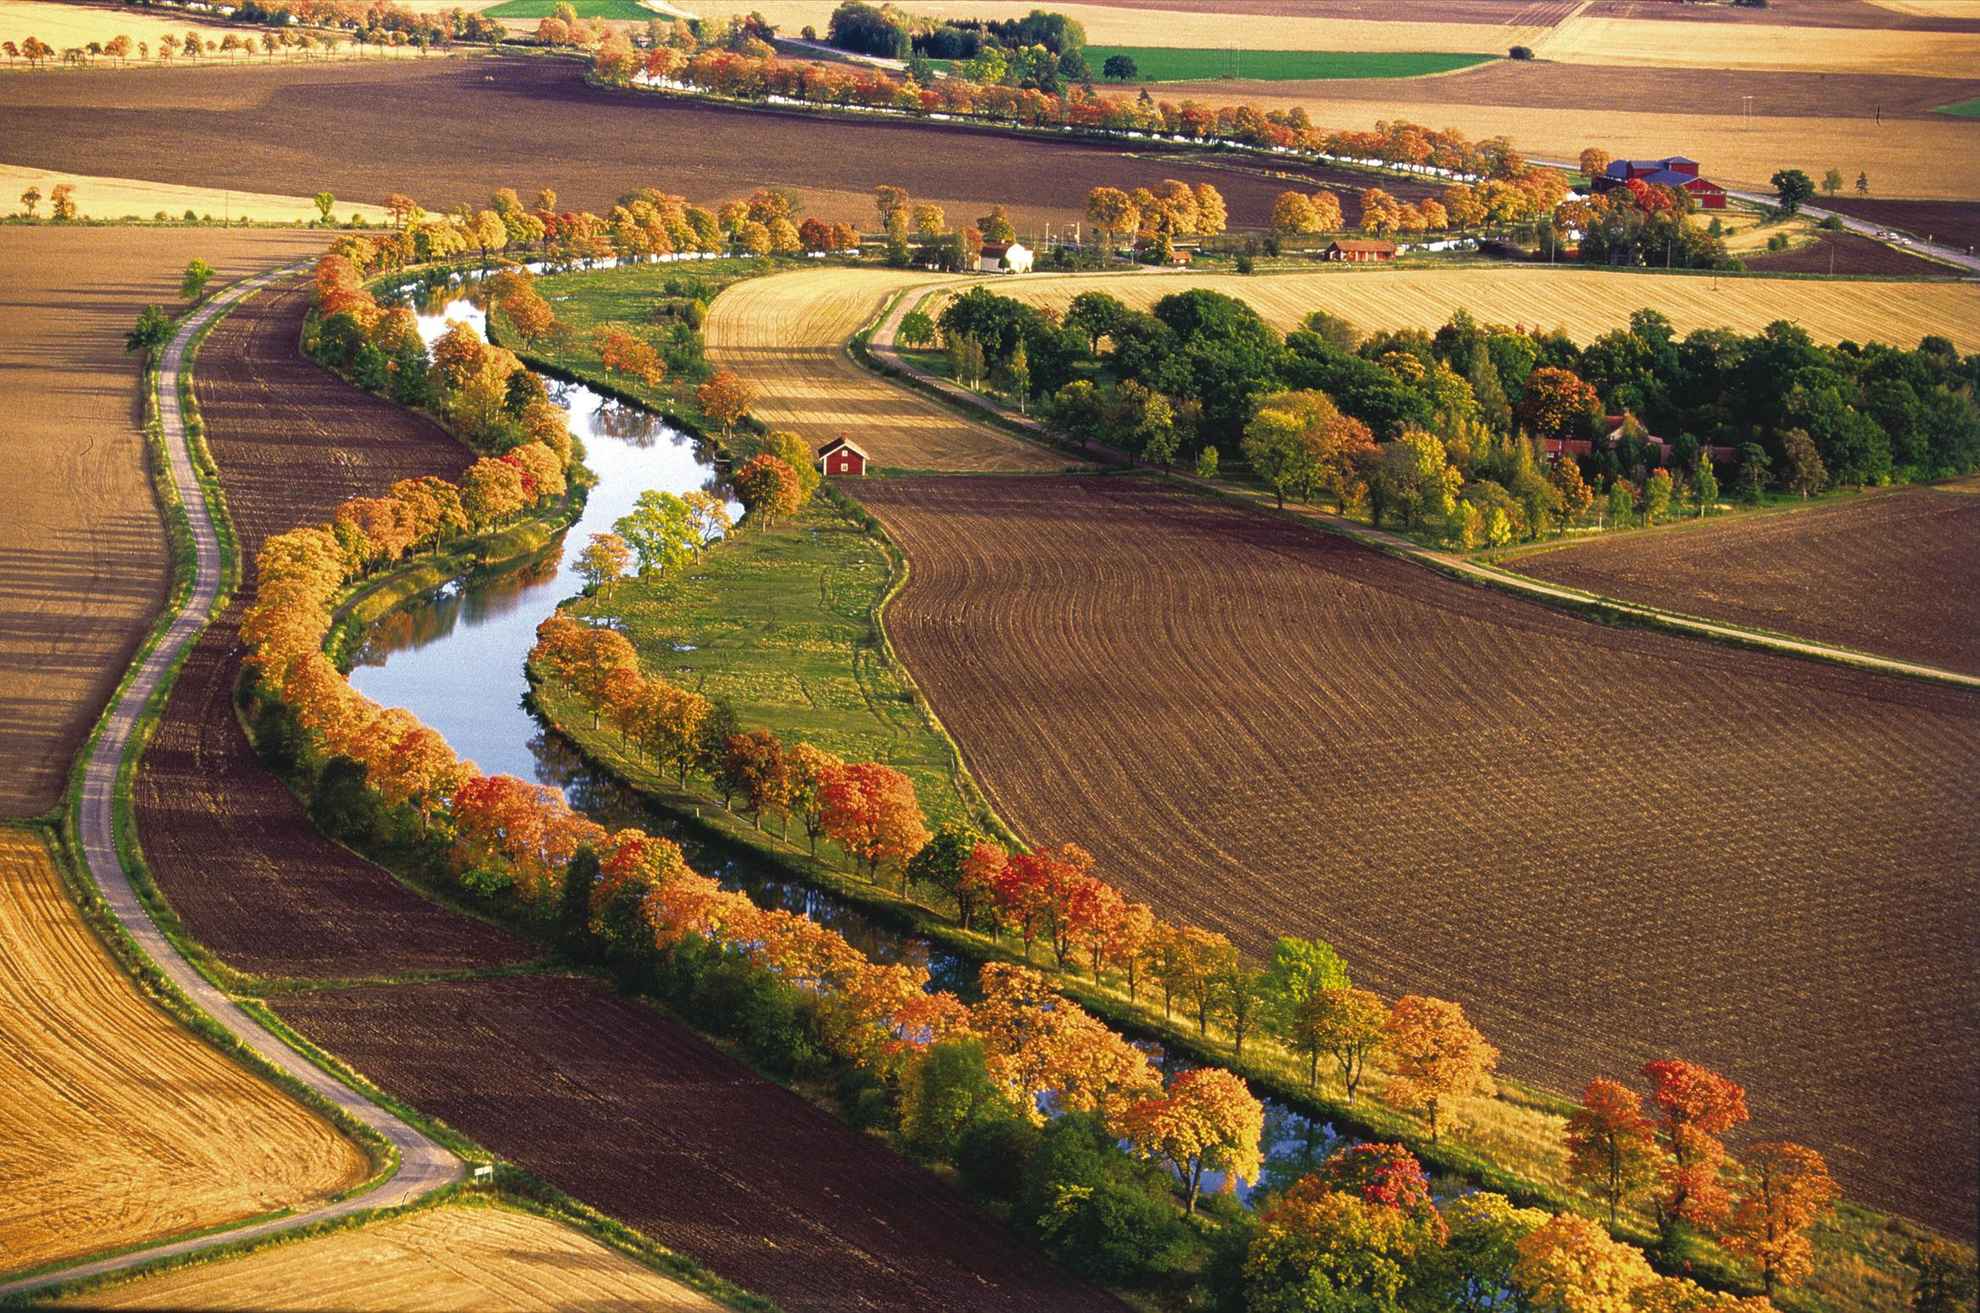 Aeriall view of Gota Kanal and surrounding farming landscape with autumn colours.